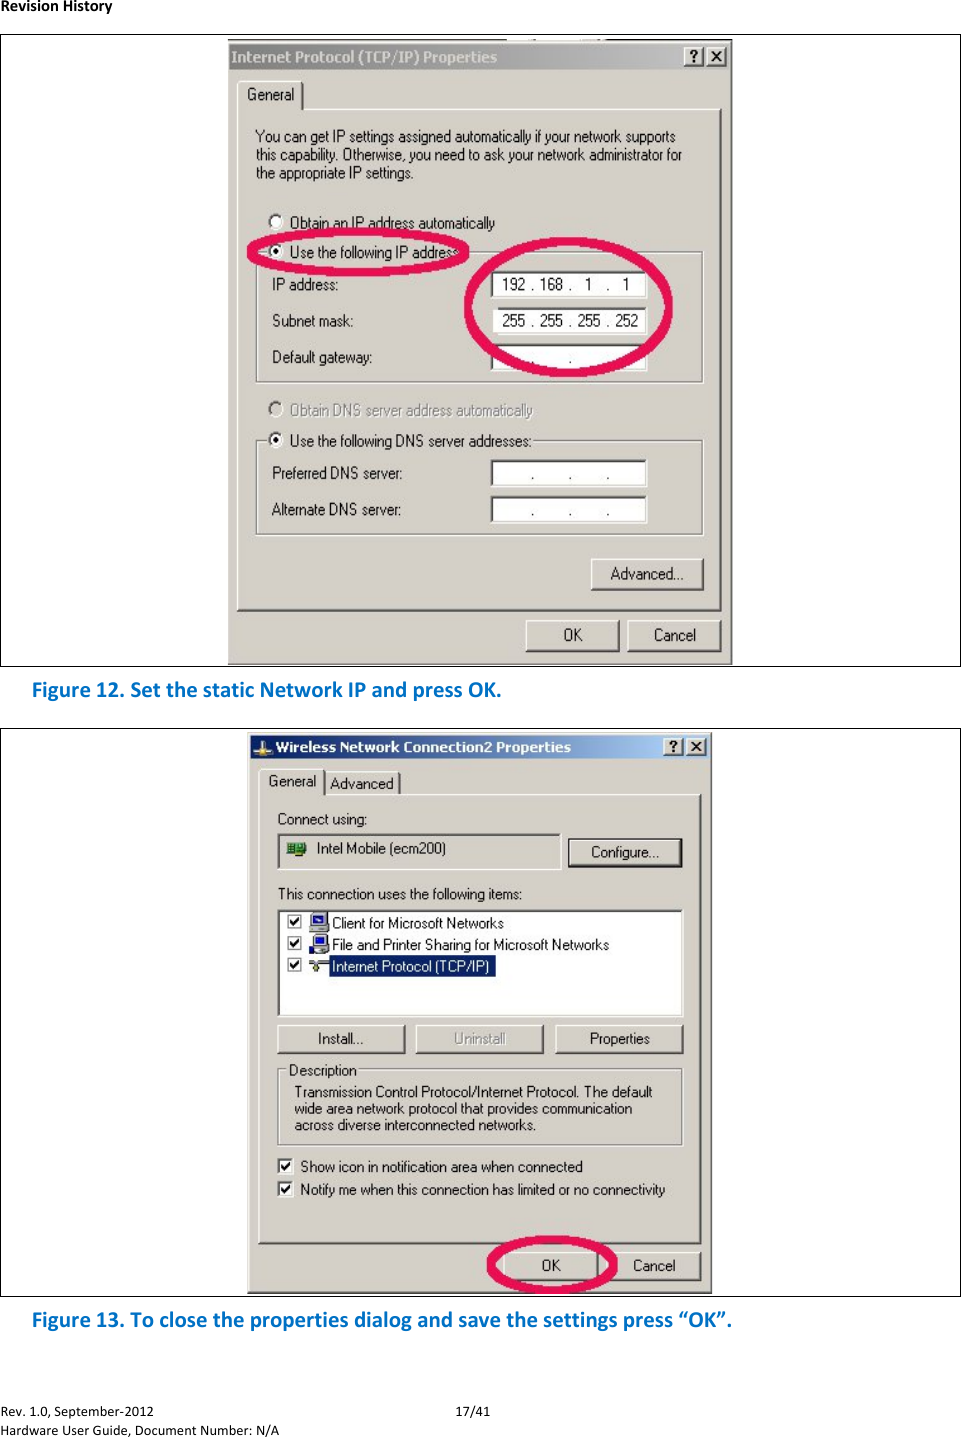    Revision History Rev. 1.0, September-2012 17/41 Hardware User Guide, Document Number: N/A  Figure 12. Set the static Network IP and press OK.  Figure 13. To close the properties dialog and save the settings press “OK”. 